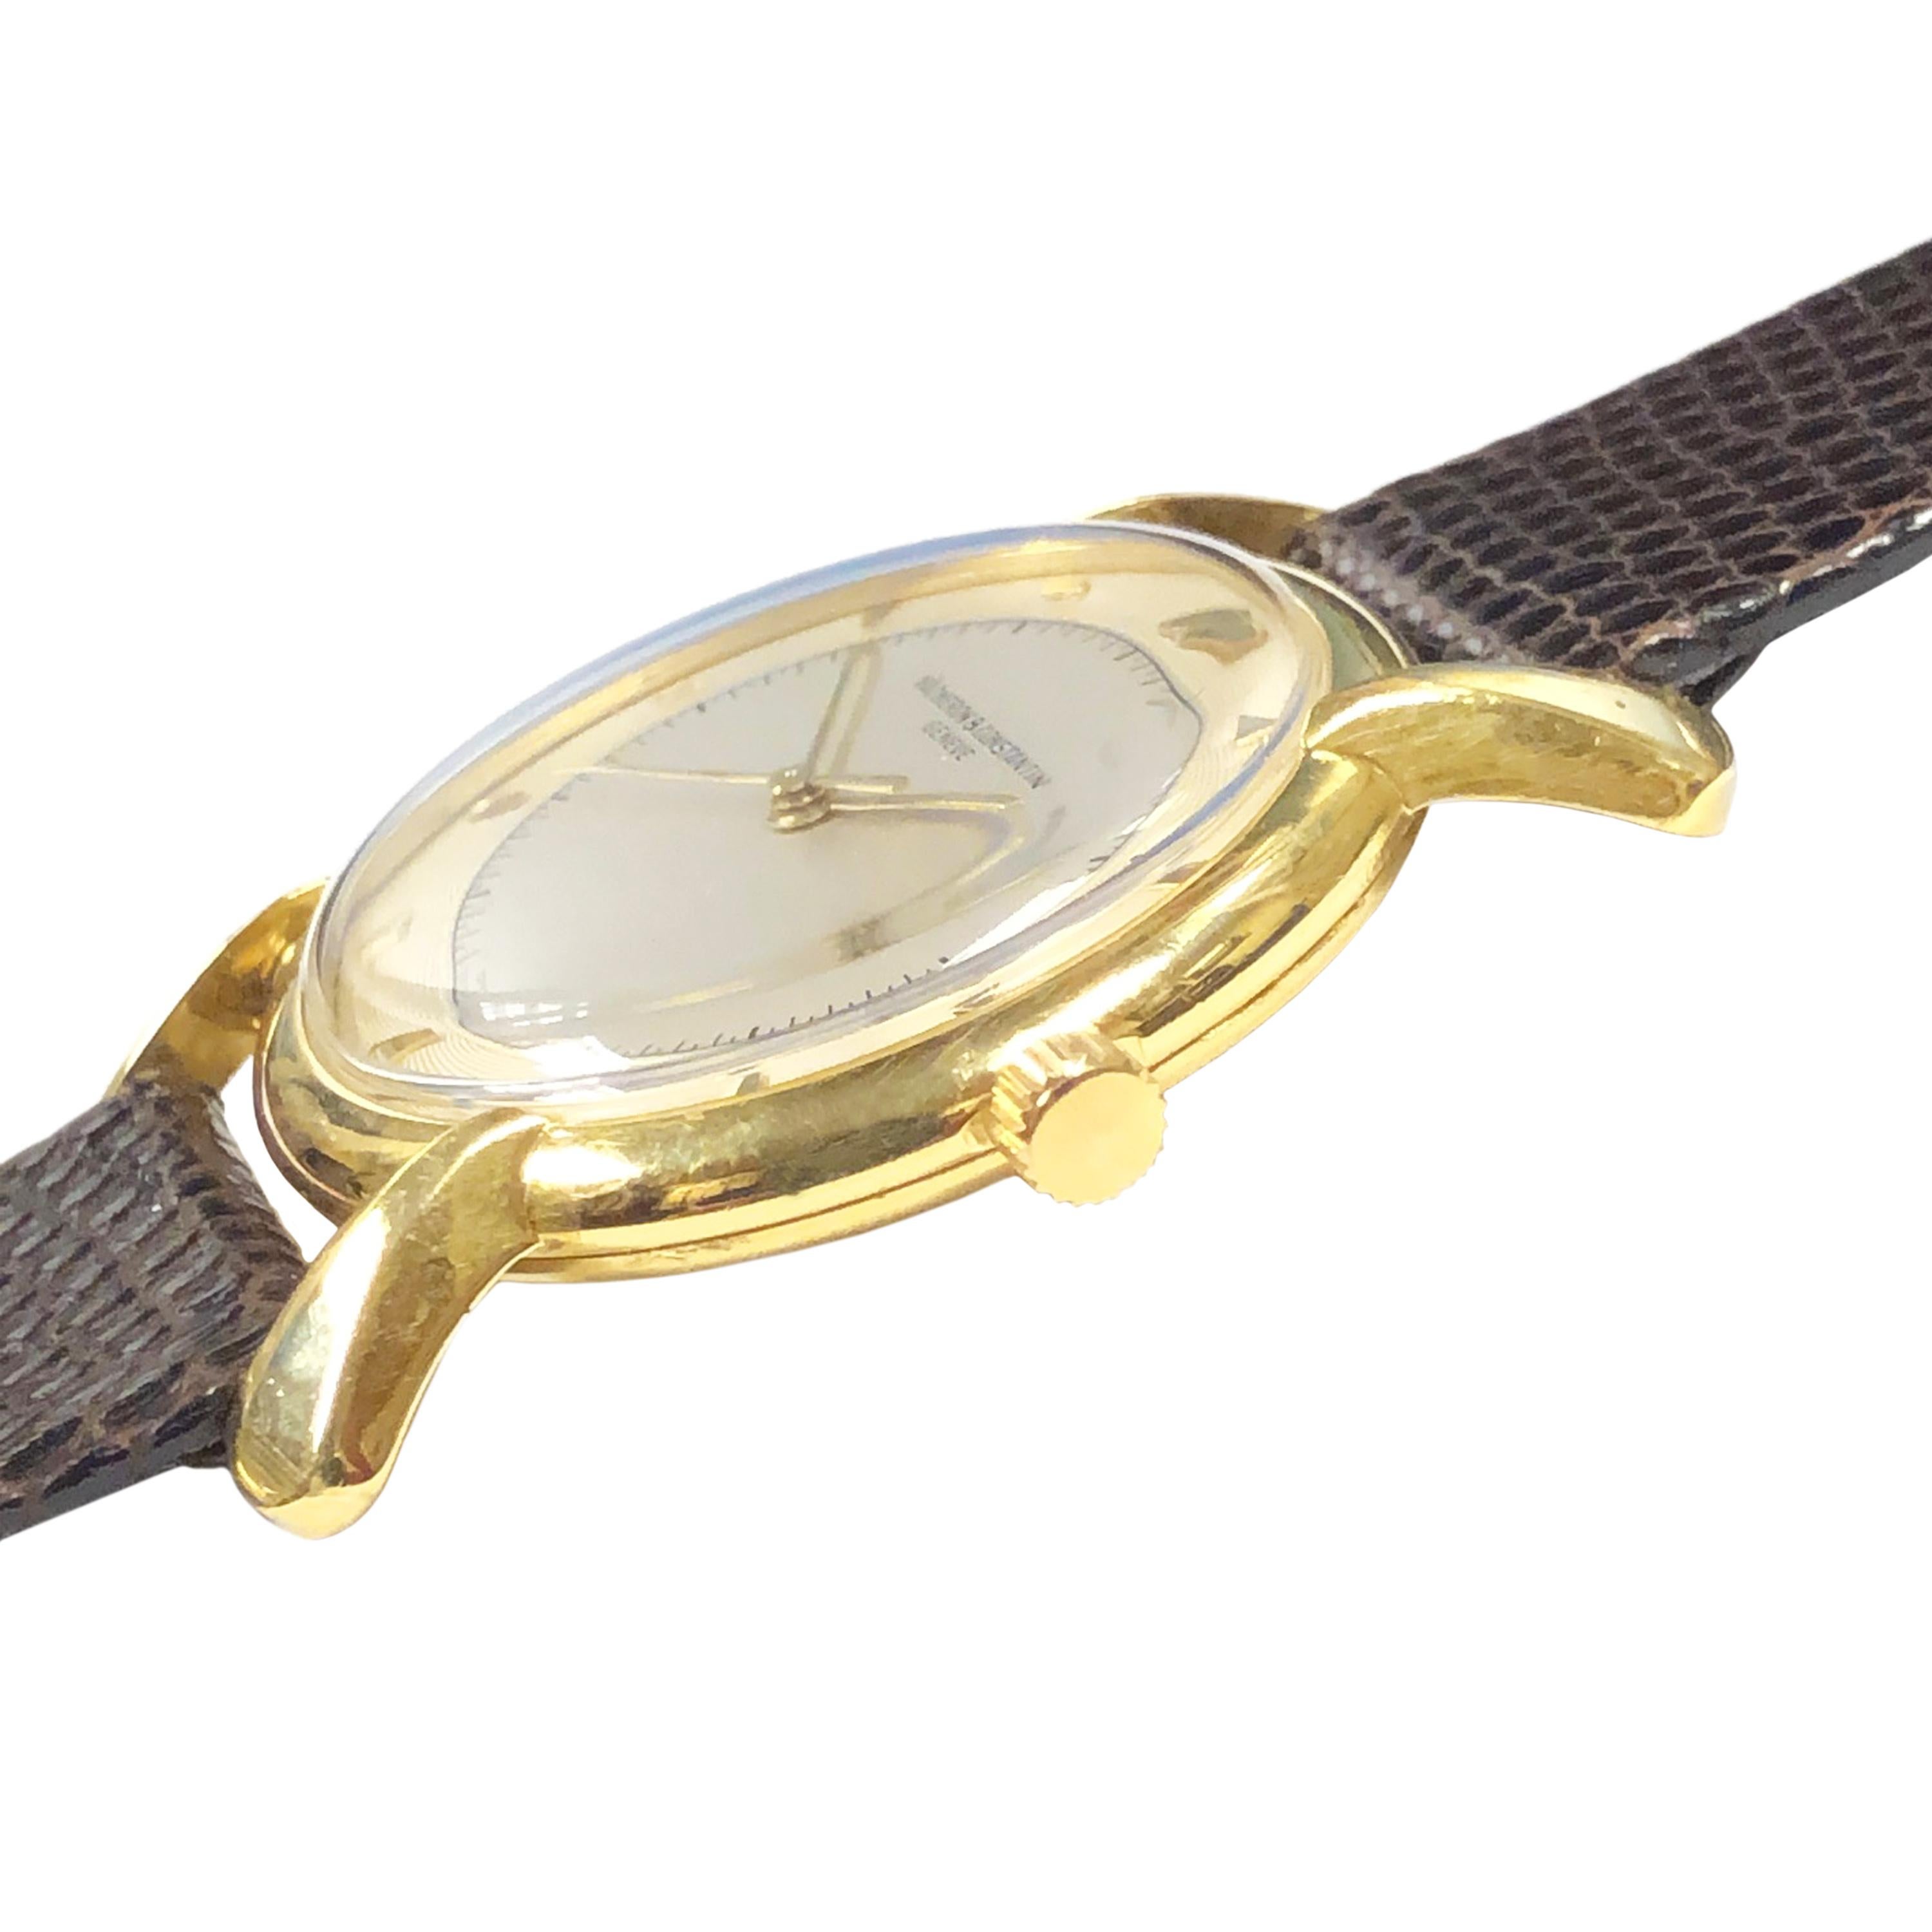 Circa late 1940s Vacheron & Constantin Wrist Watch, 33 MM 18K Yellow Gold 2 Piece Case with Eccentric Flared Lugs. 17 Jewel caliber 1002 Mechanical, Manual wind Movement. Engine Turned stepped silver Dial with raised Gold Markers and a sweep seconds